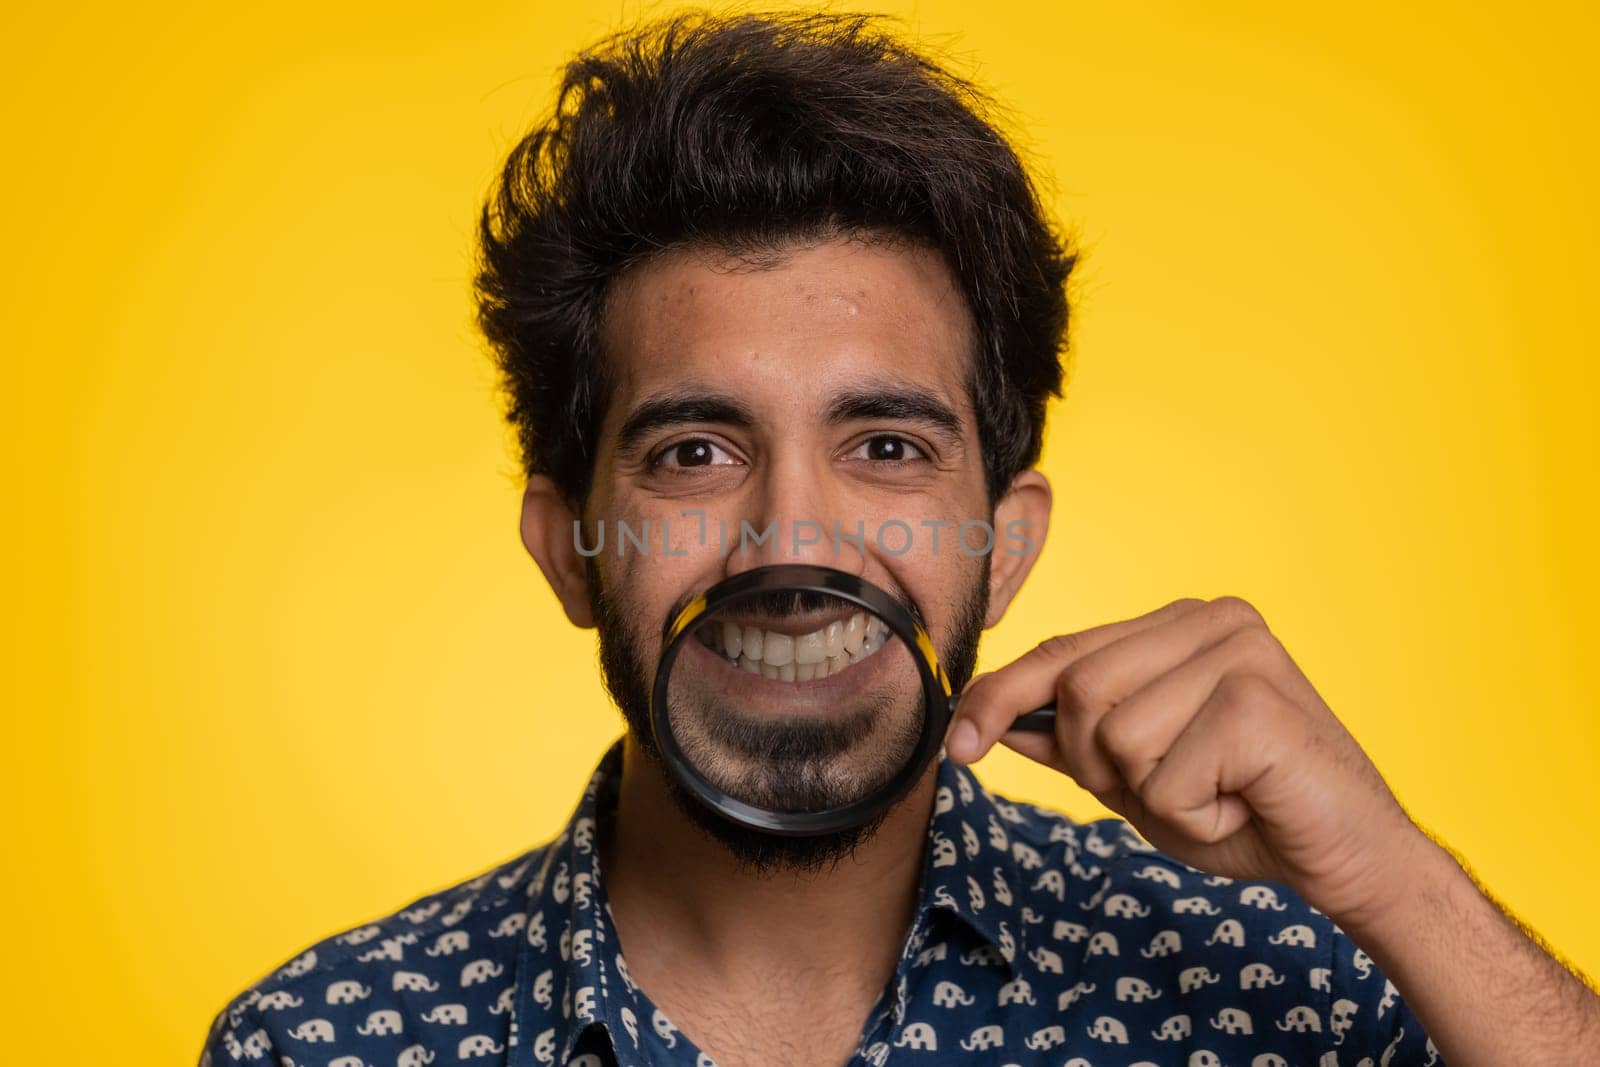 Indian man holding magnifier glass on healthy white teeth, looking at camera with happy expression, showing funny silly face smiling mouth. Handsome hindu guy isolated on yellow studio background